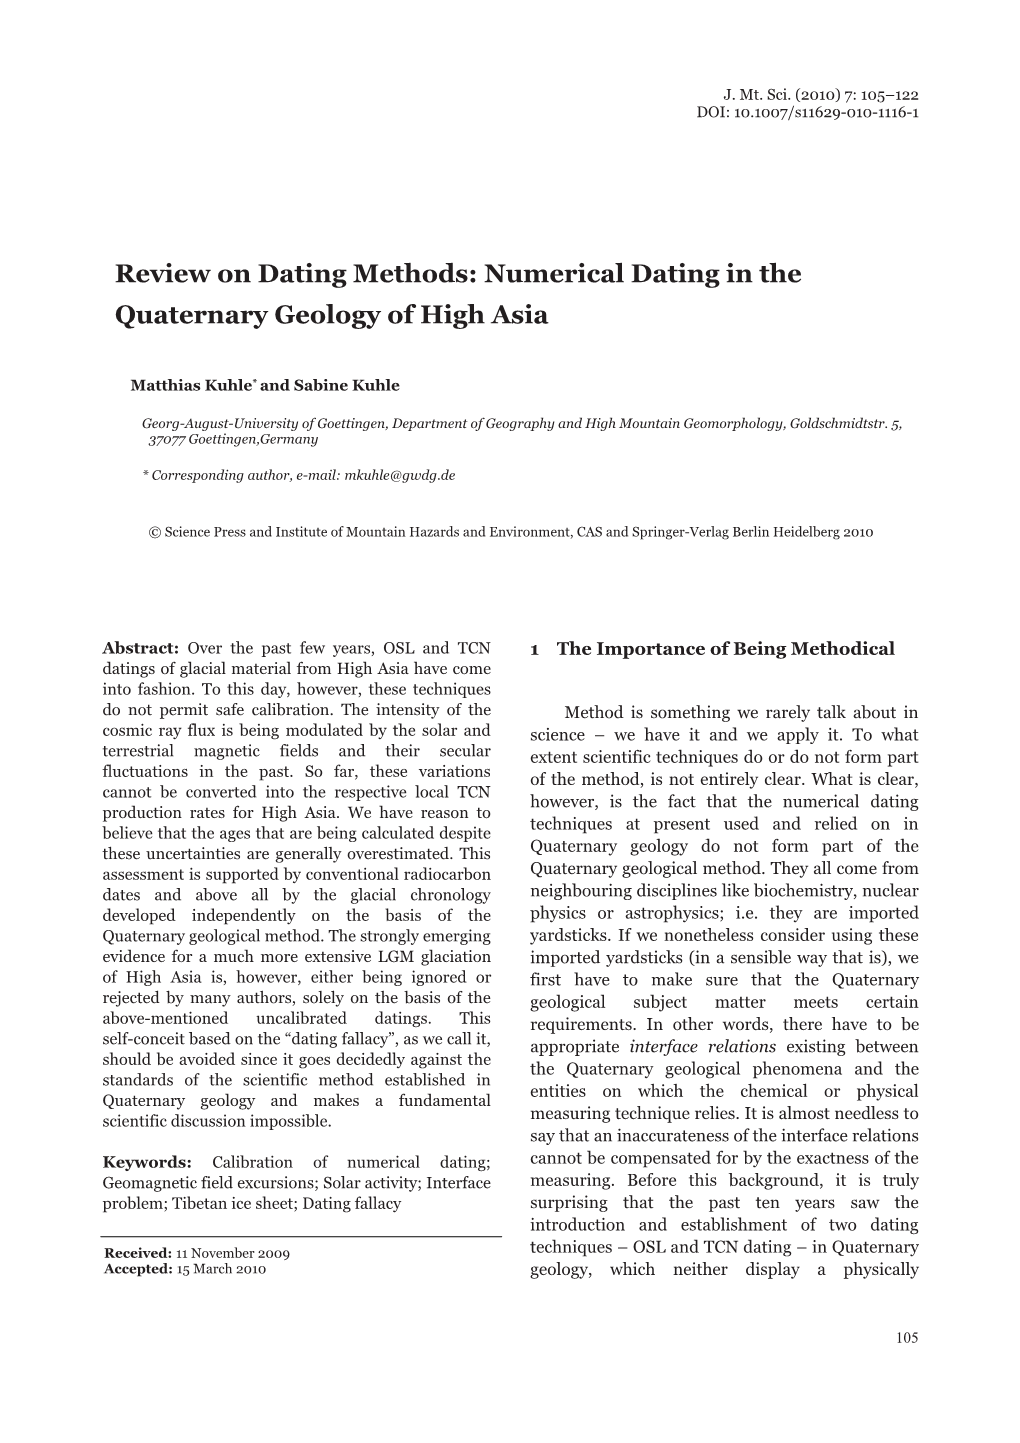 Review on Dating Methods: Numerical Dating in the Quaternary Geology of High Asia